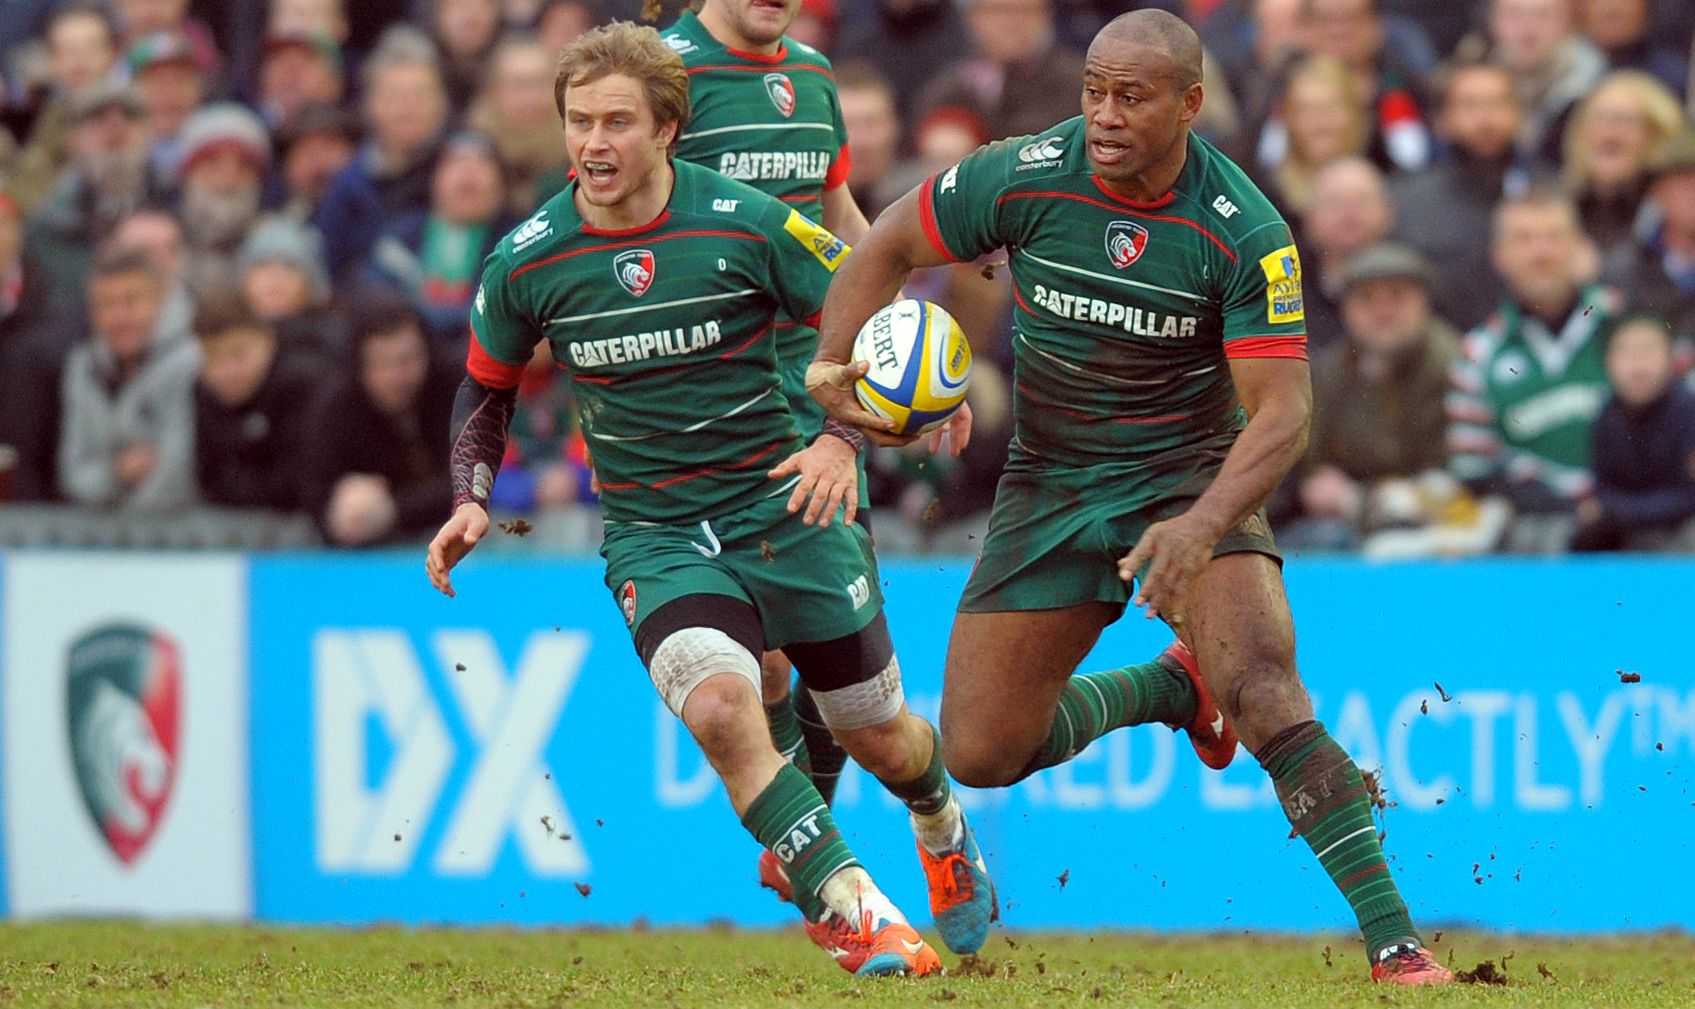 Leicester Tigers v Sale Sharks, Aviva Premiership, Rugby Union, Welford Road, Britain - 28 Feb 2015